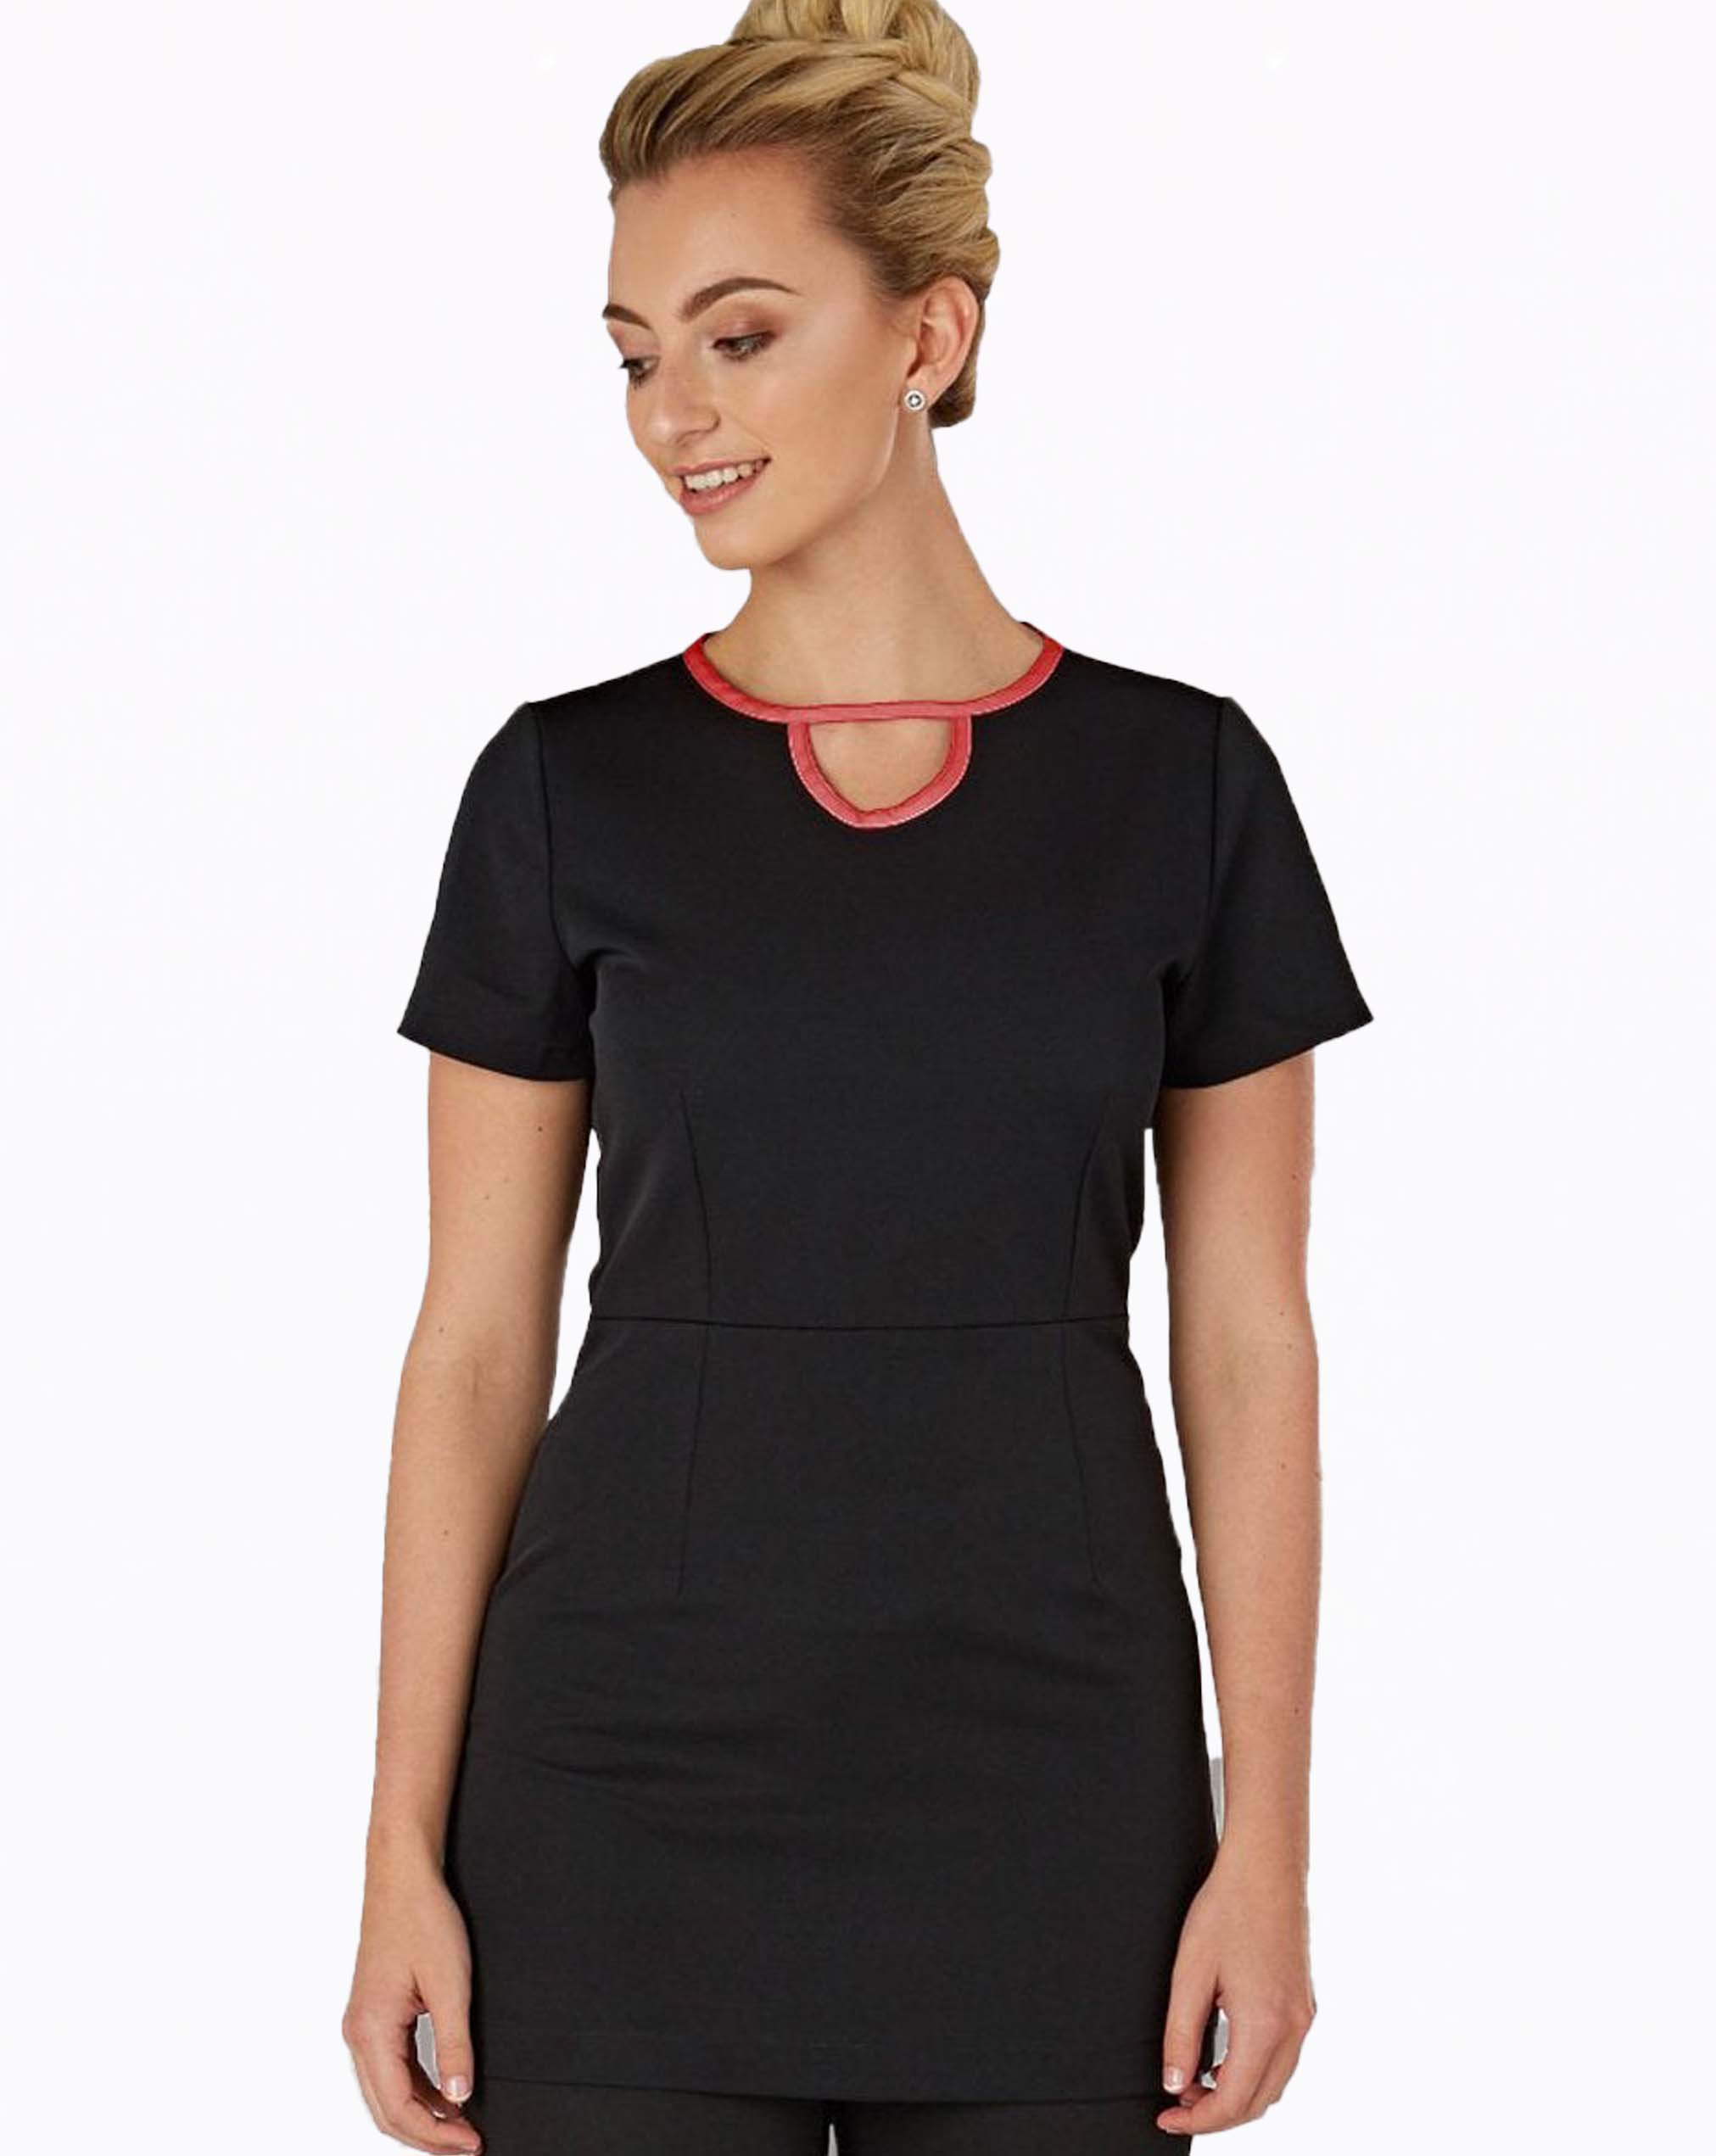 Dazzle Cut-out Neck Beauty Tunic - Black / Red